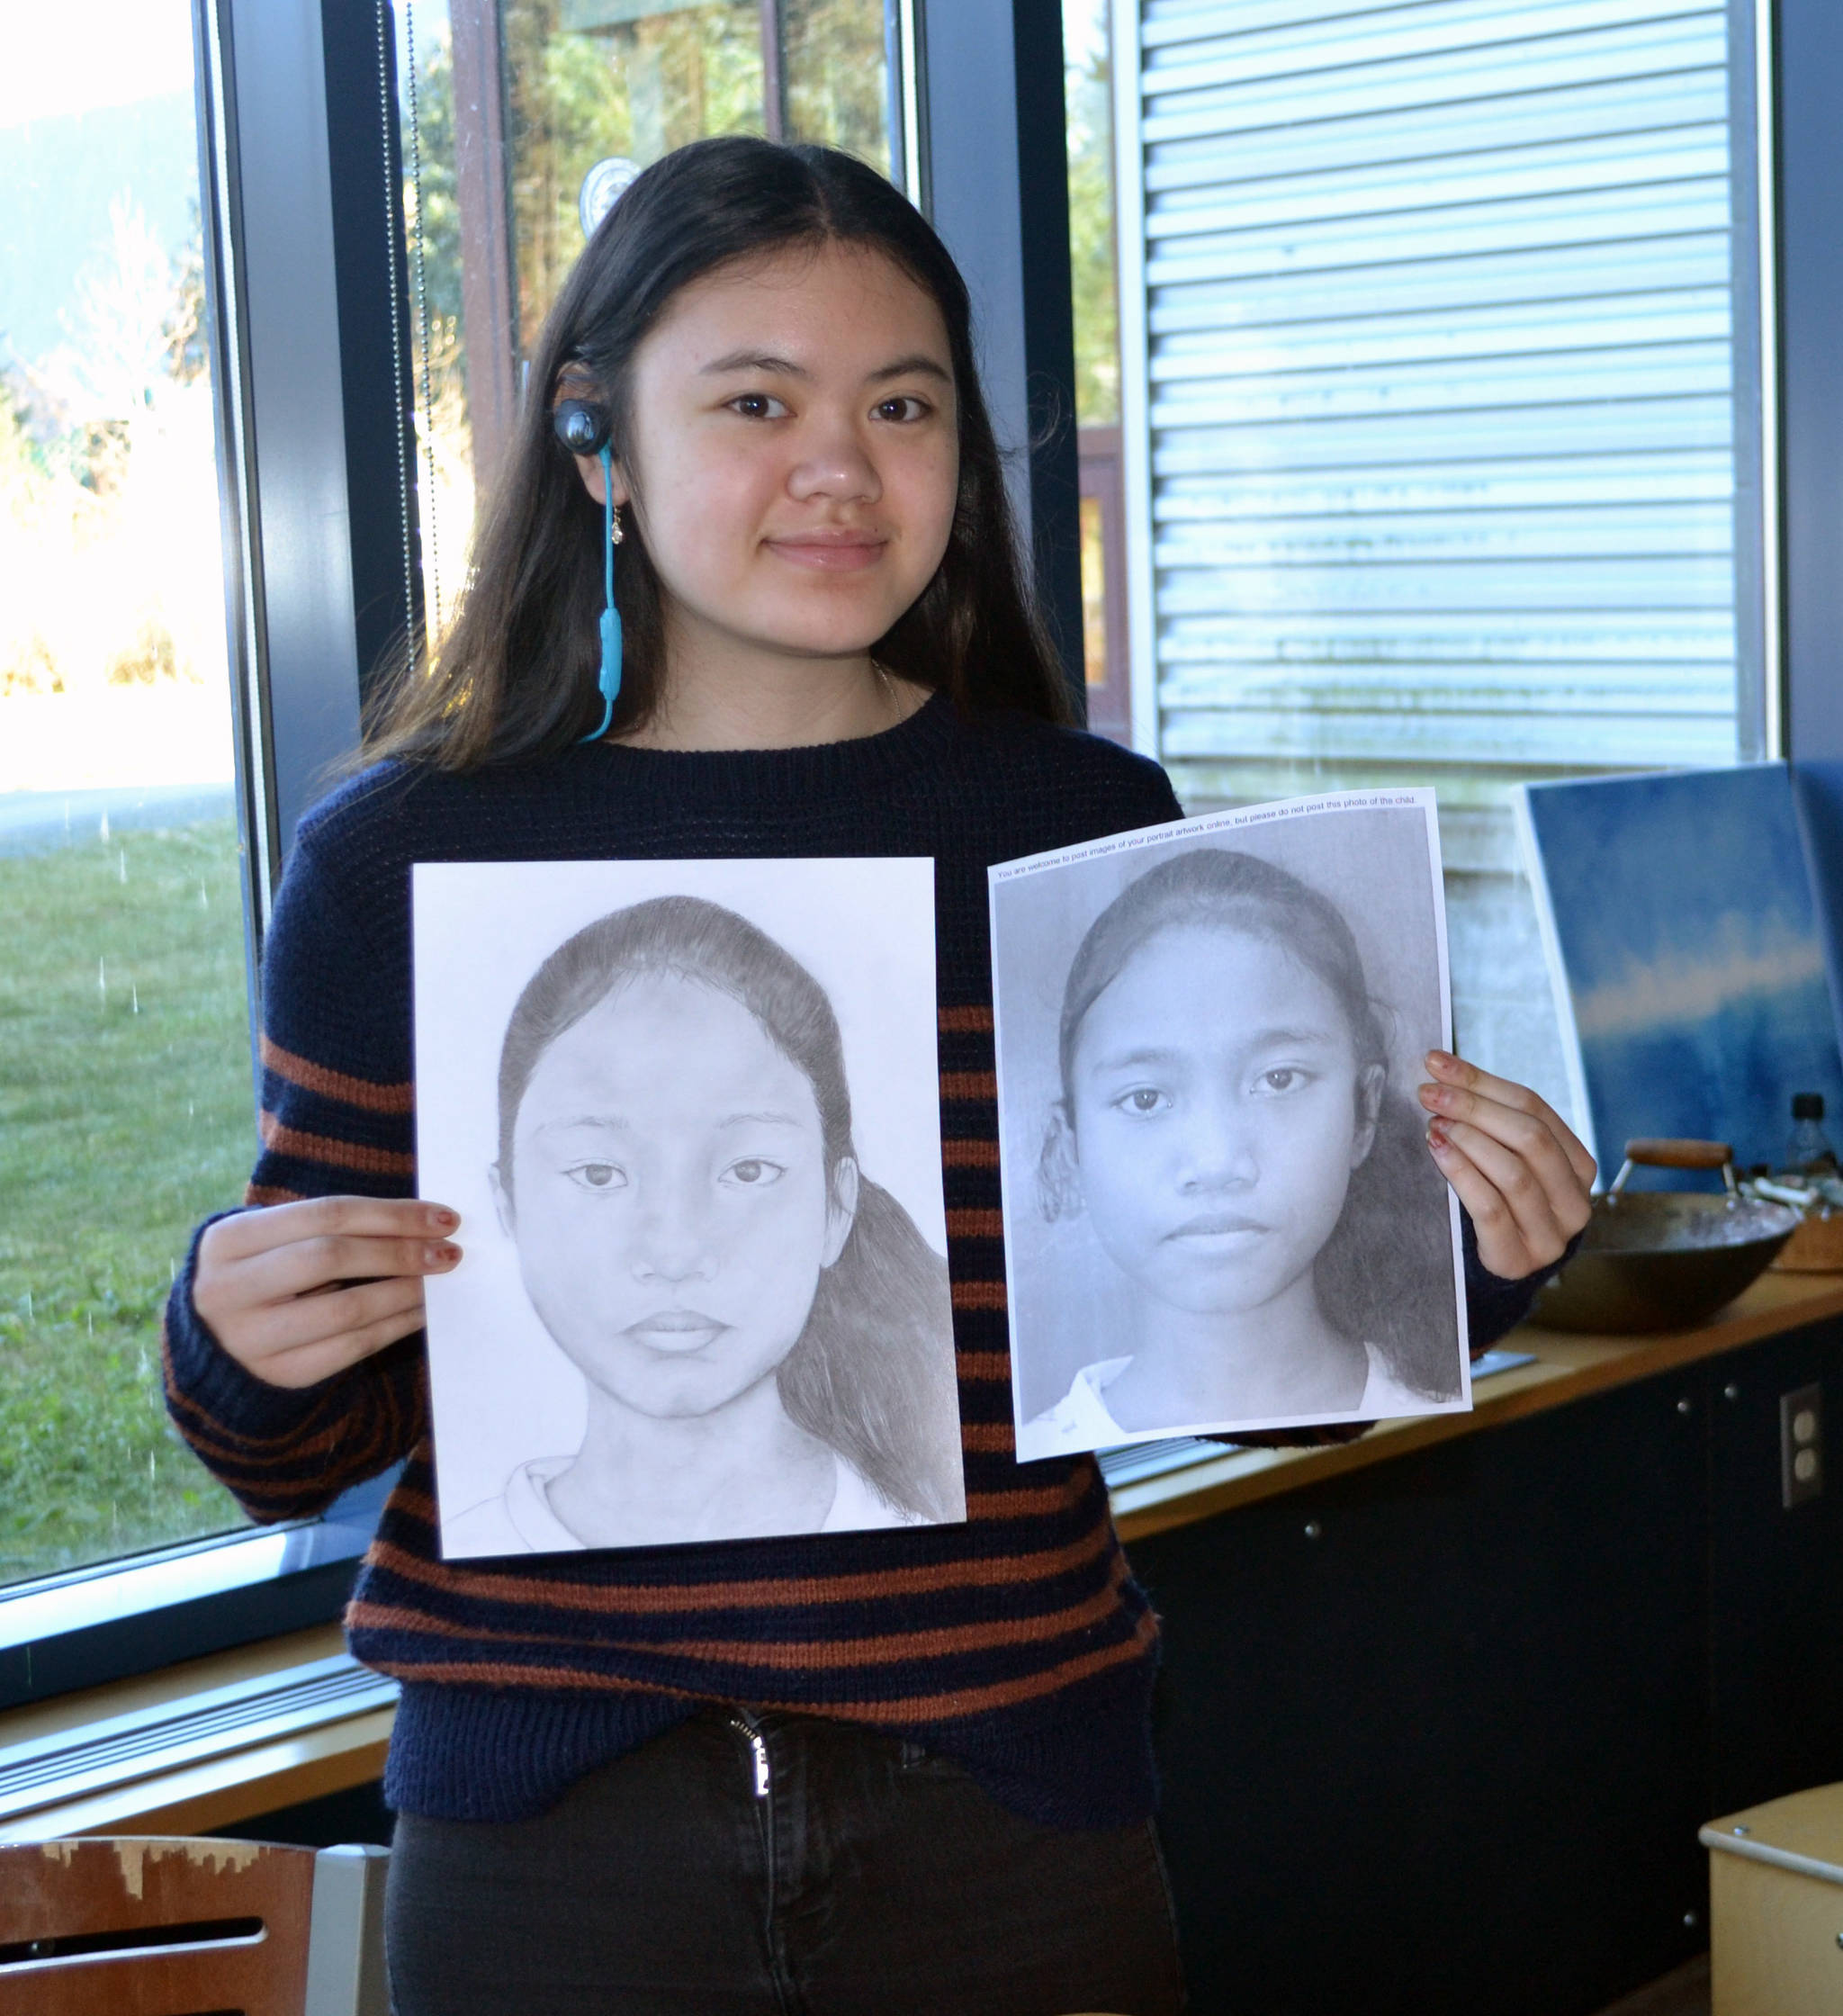 Thunder Mountain High School junior Tianah Sangster poses with portraits she made as part of the Memory Project. The project sends portraits to children in distress all over the world, giving them a keepsake. (Photo courtesy of Angela Imboden)